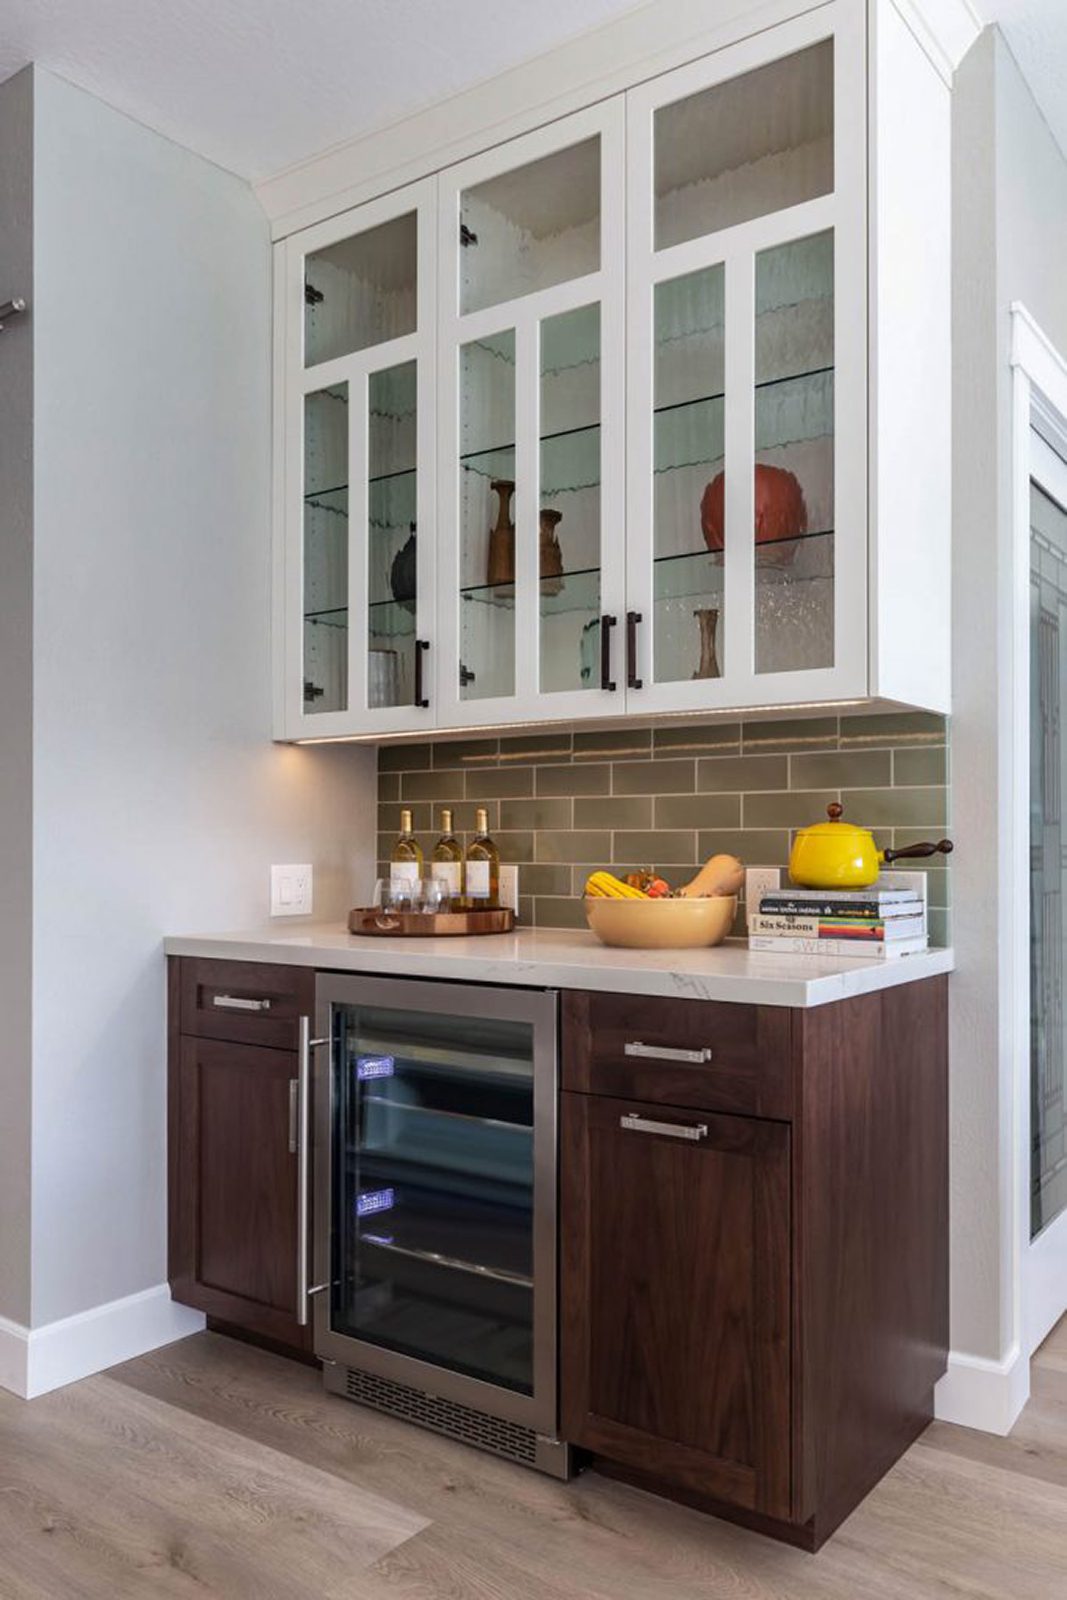 addition ideas in a home remodel could include a kitchen-side beverage station with room for storage and display